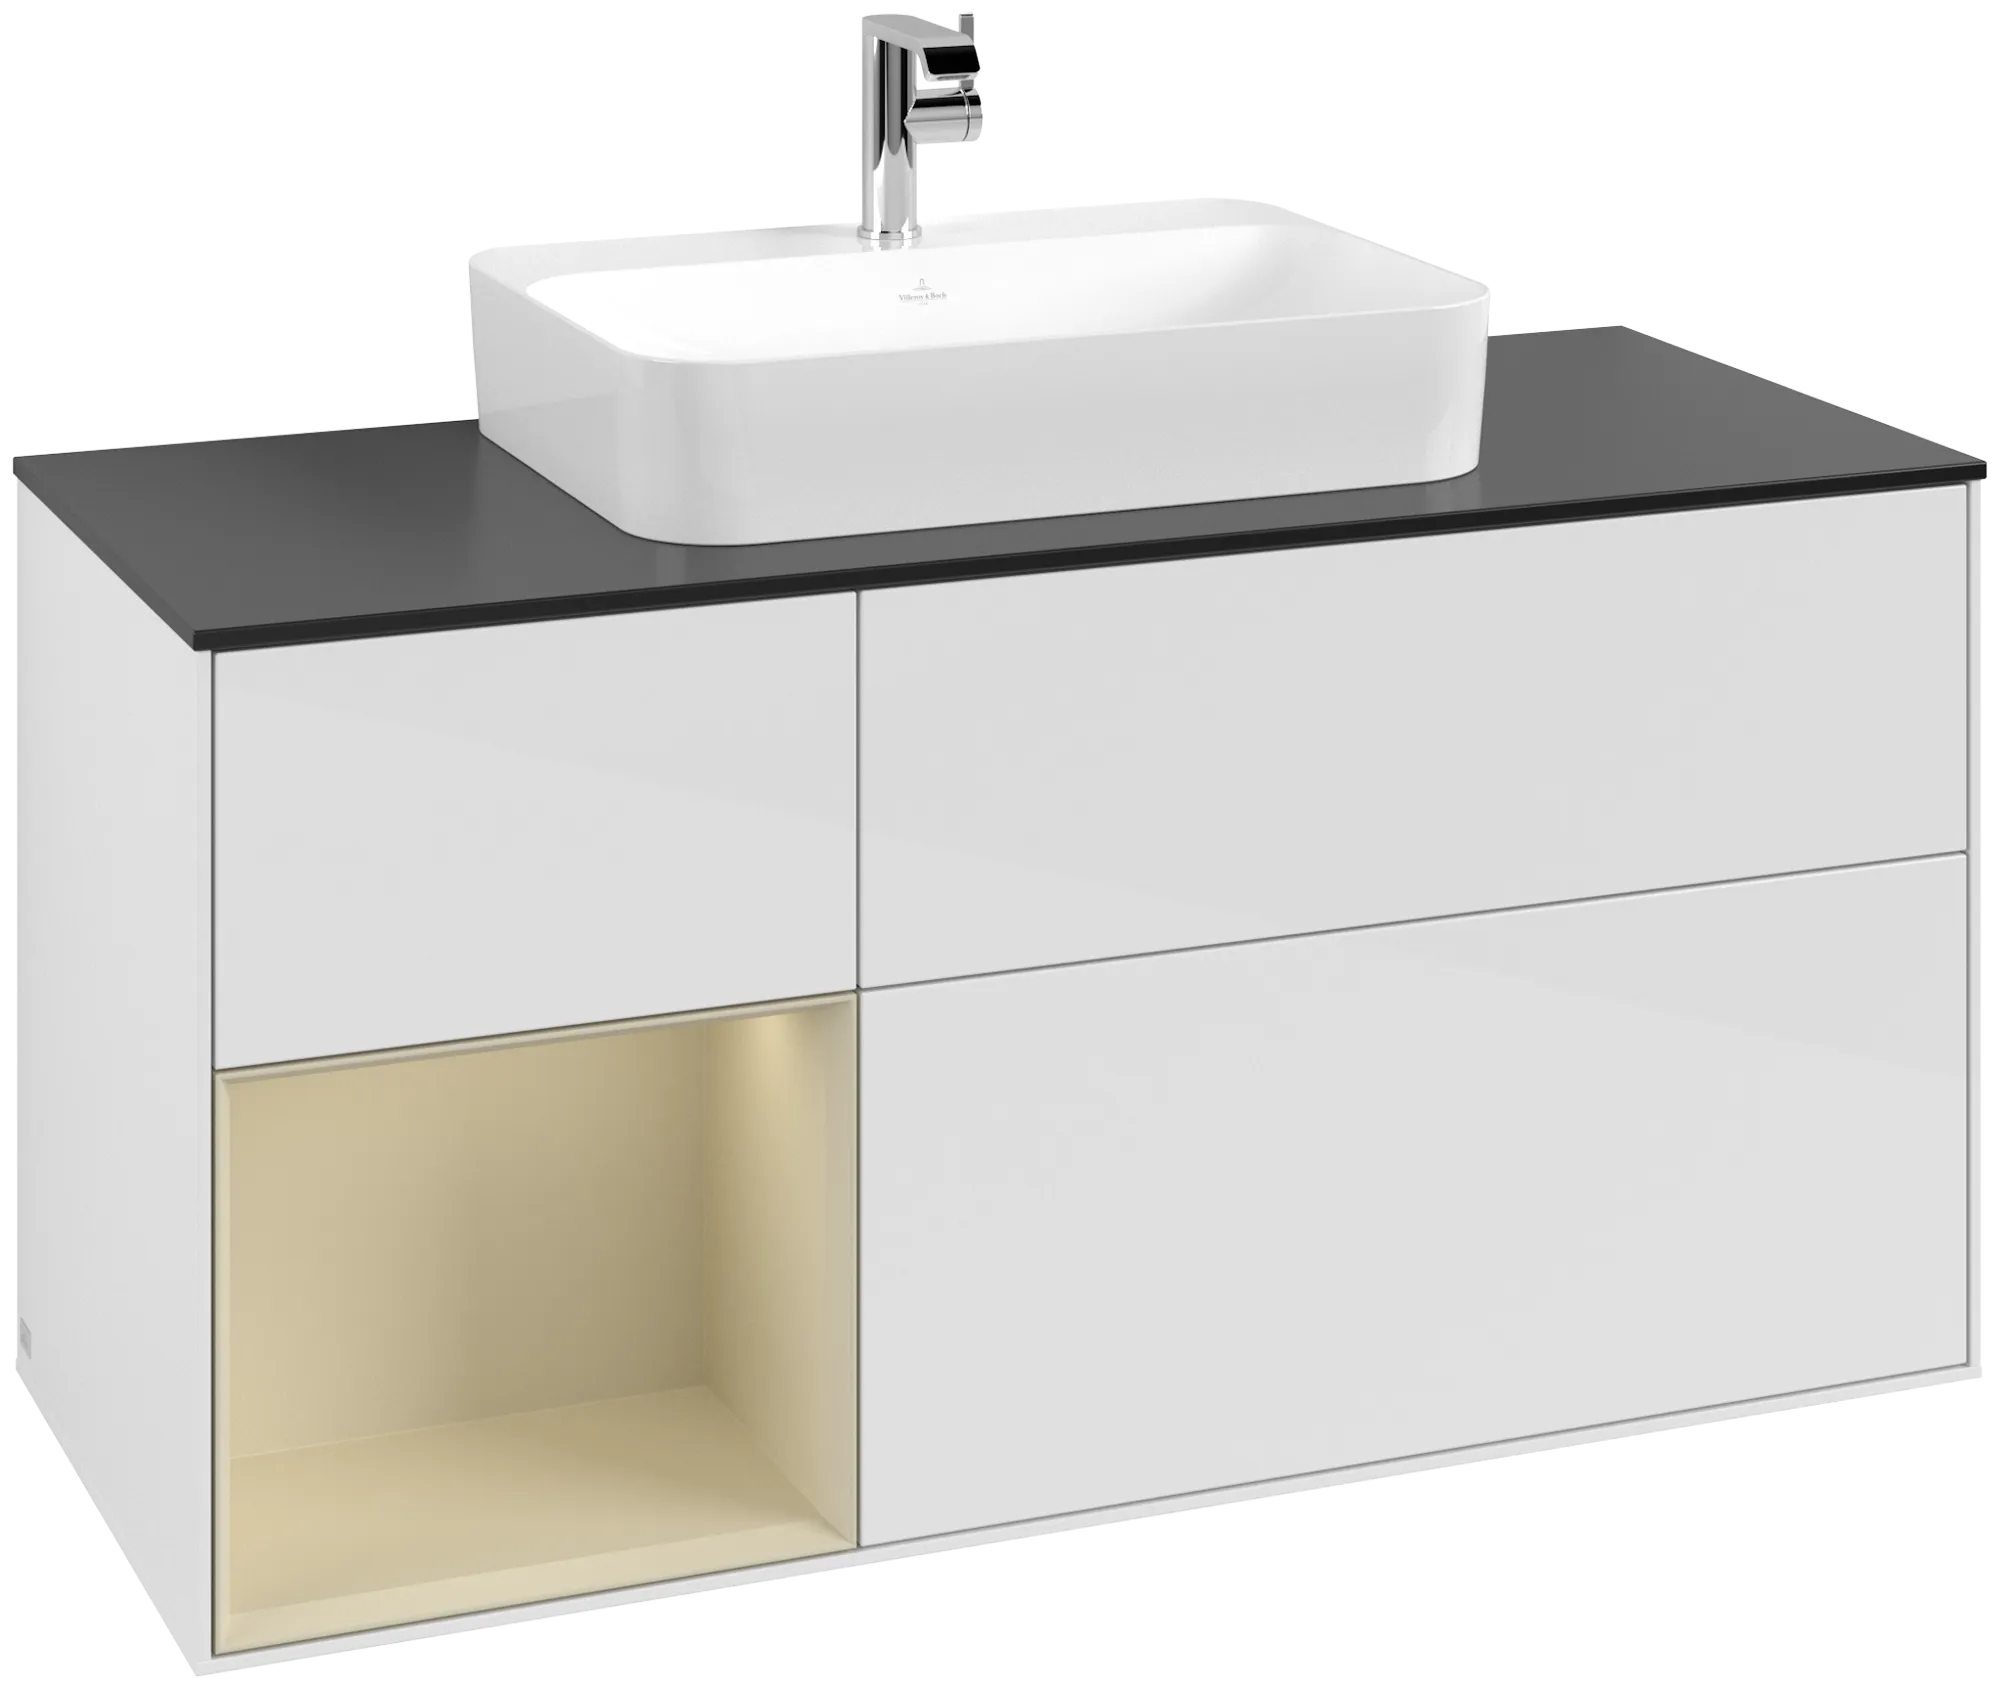 VILLEROY BOCH Finion Vanity unit, with lighting, 3 pull-out compartments, 1200 x 603 x 501 mm, Glossy White Lacquer / Silk Grey Matt Lacquer / Glass Black Matt #G412HJGF resmi